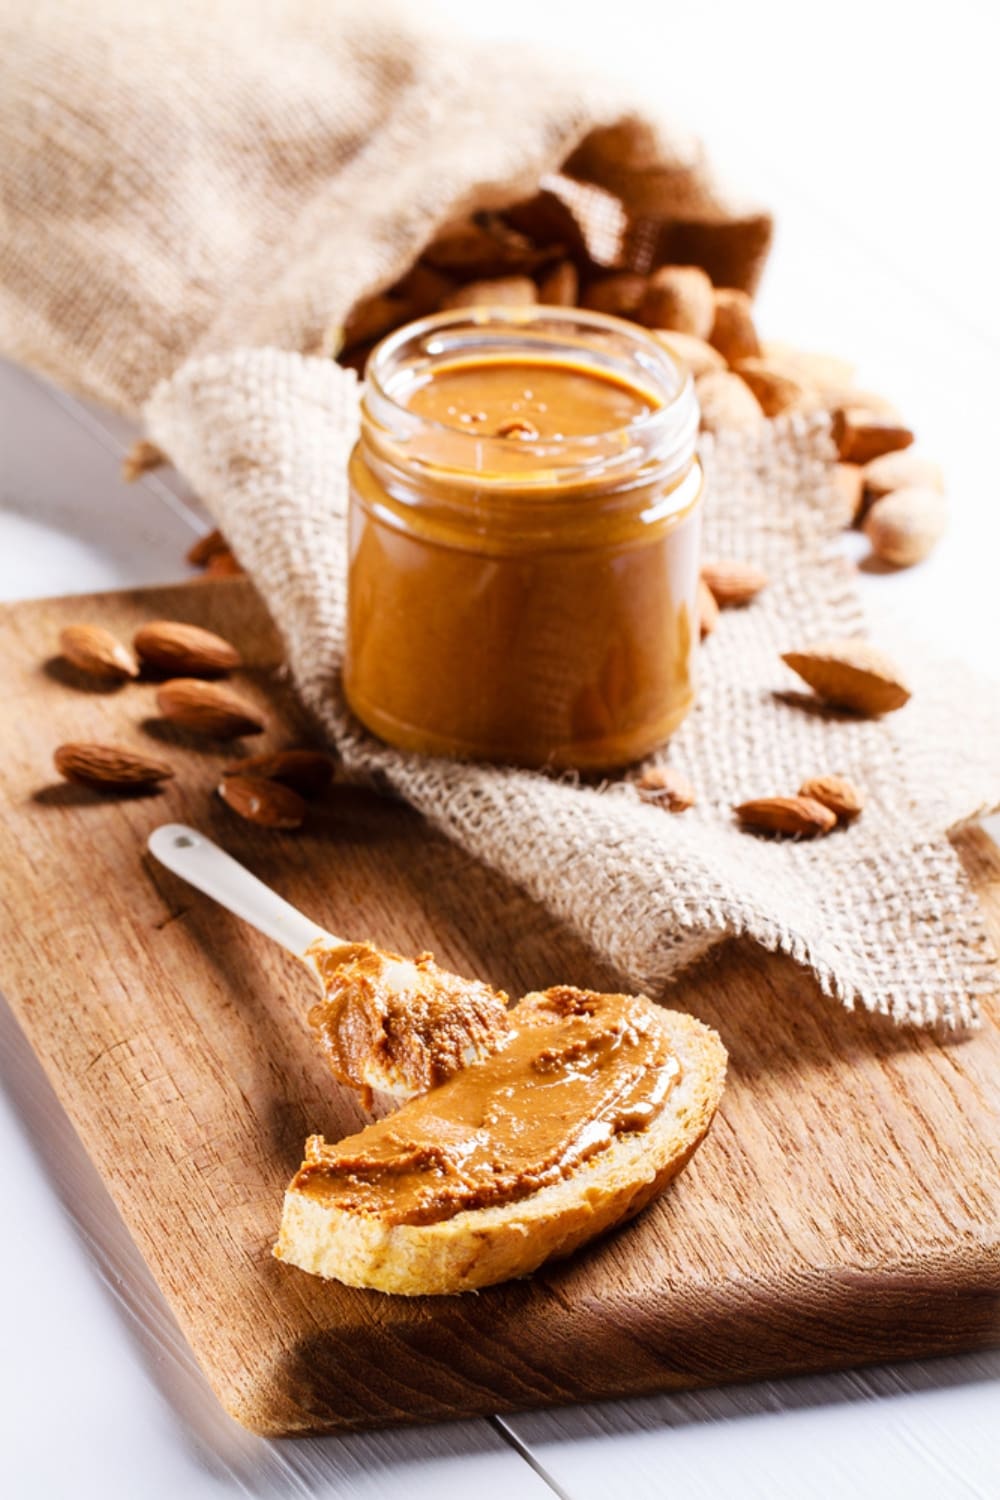 Jar of Homemade Almond Butter on a Burlap Sack with Slice of Bread With Almond Butter in Foreground